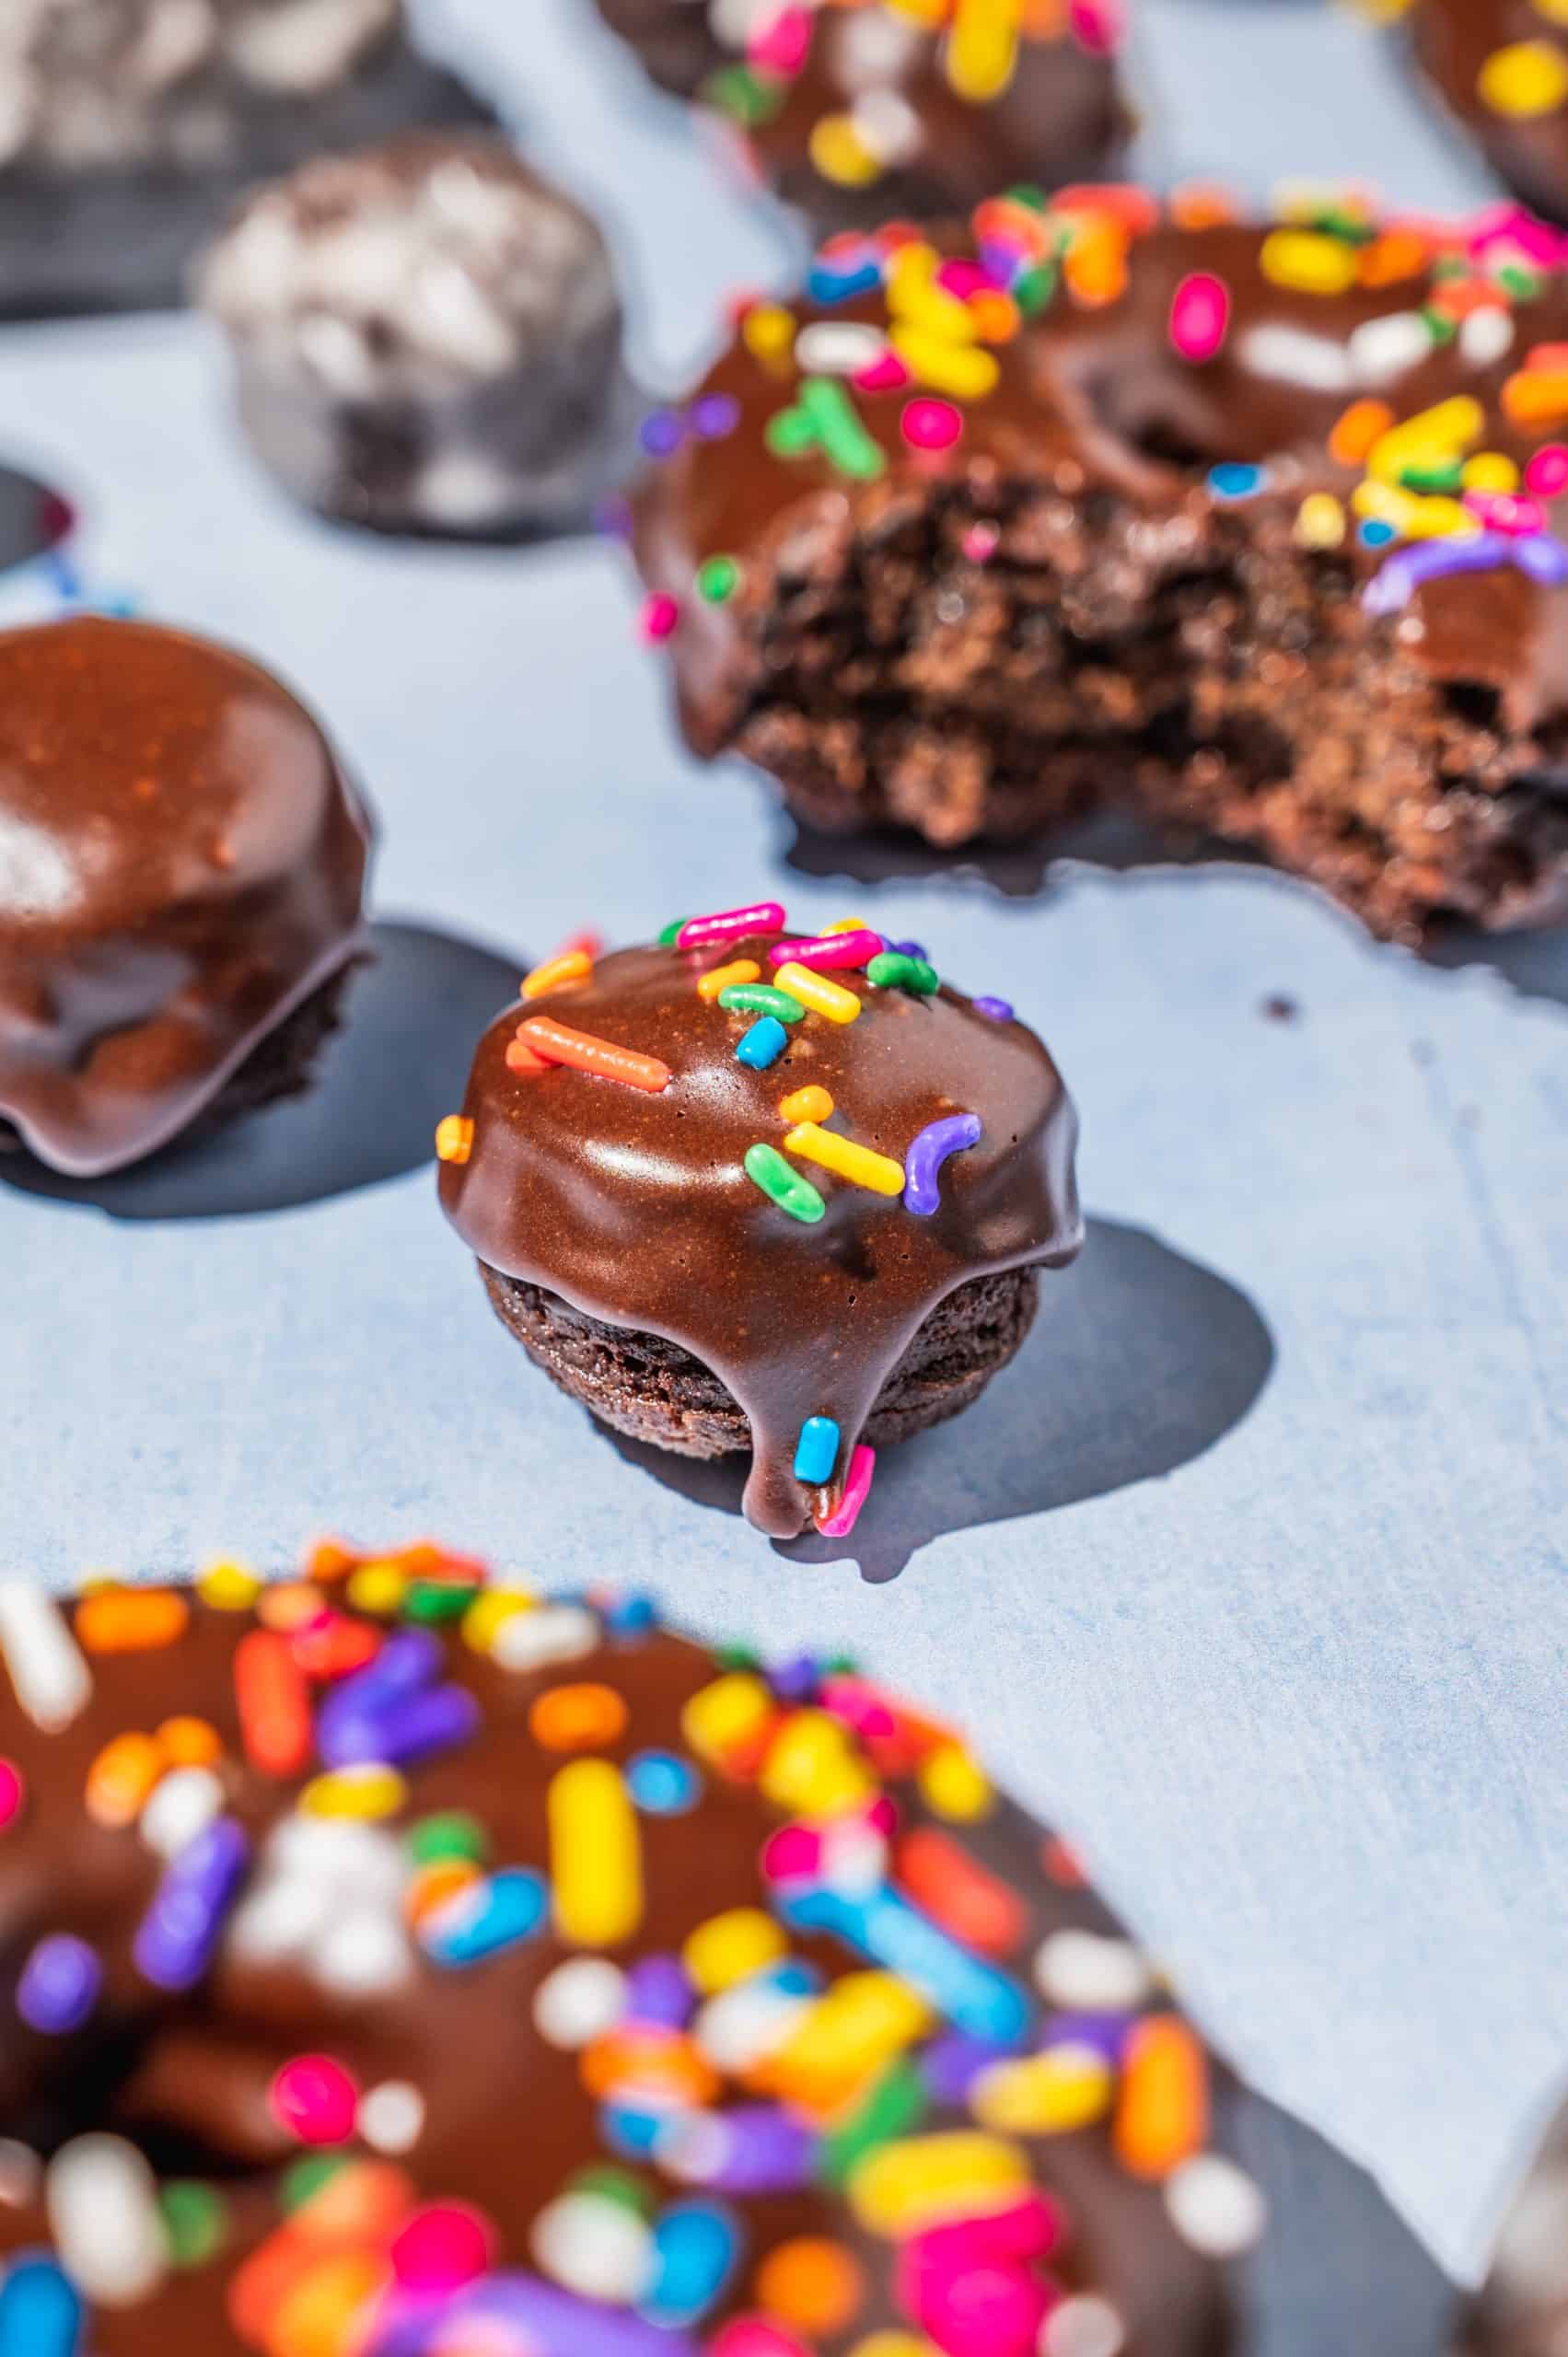 chocolate cake donut hole with chocolate glaze and rainbow sprinkles surrounded by more donuts